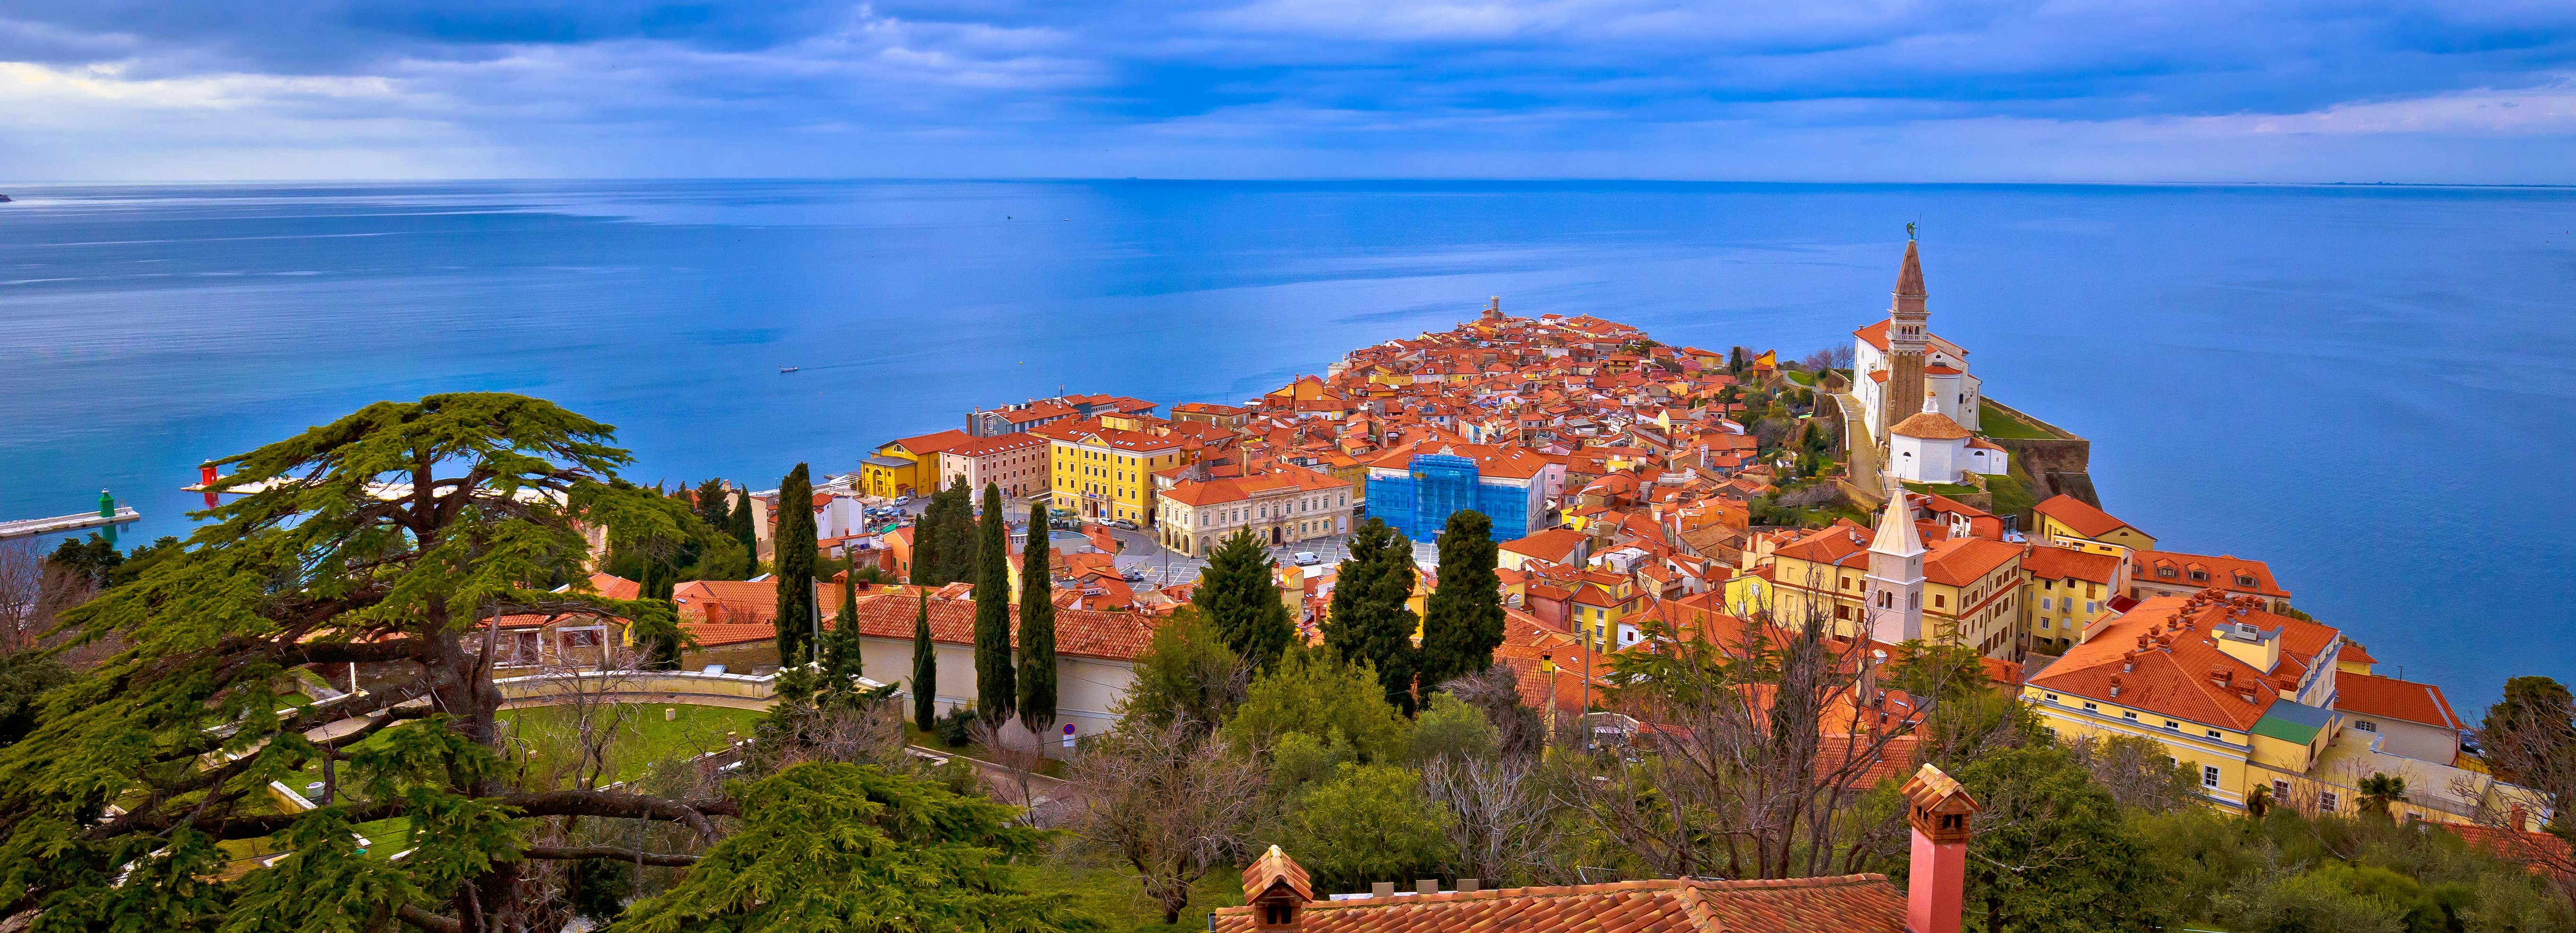 Guided tour of Piran and the Slovenian coast from Trieste Musement